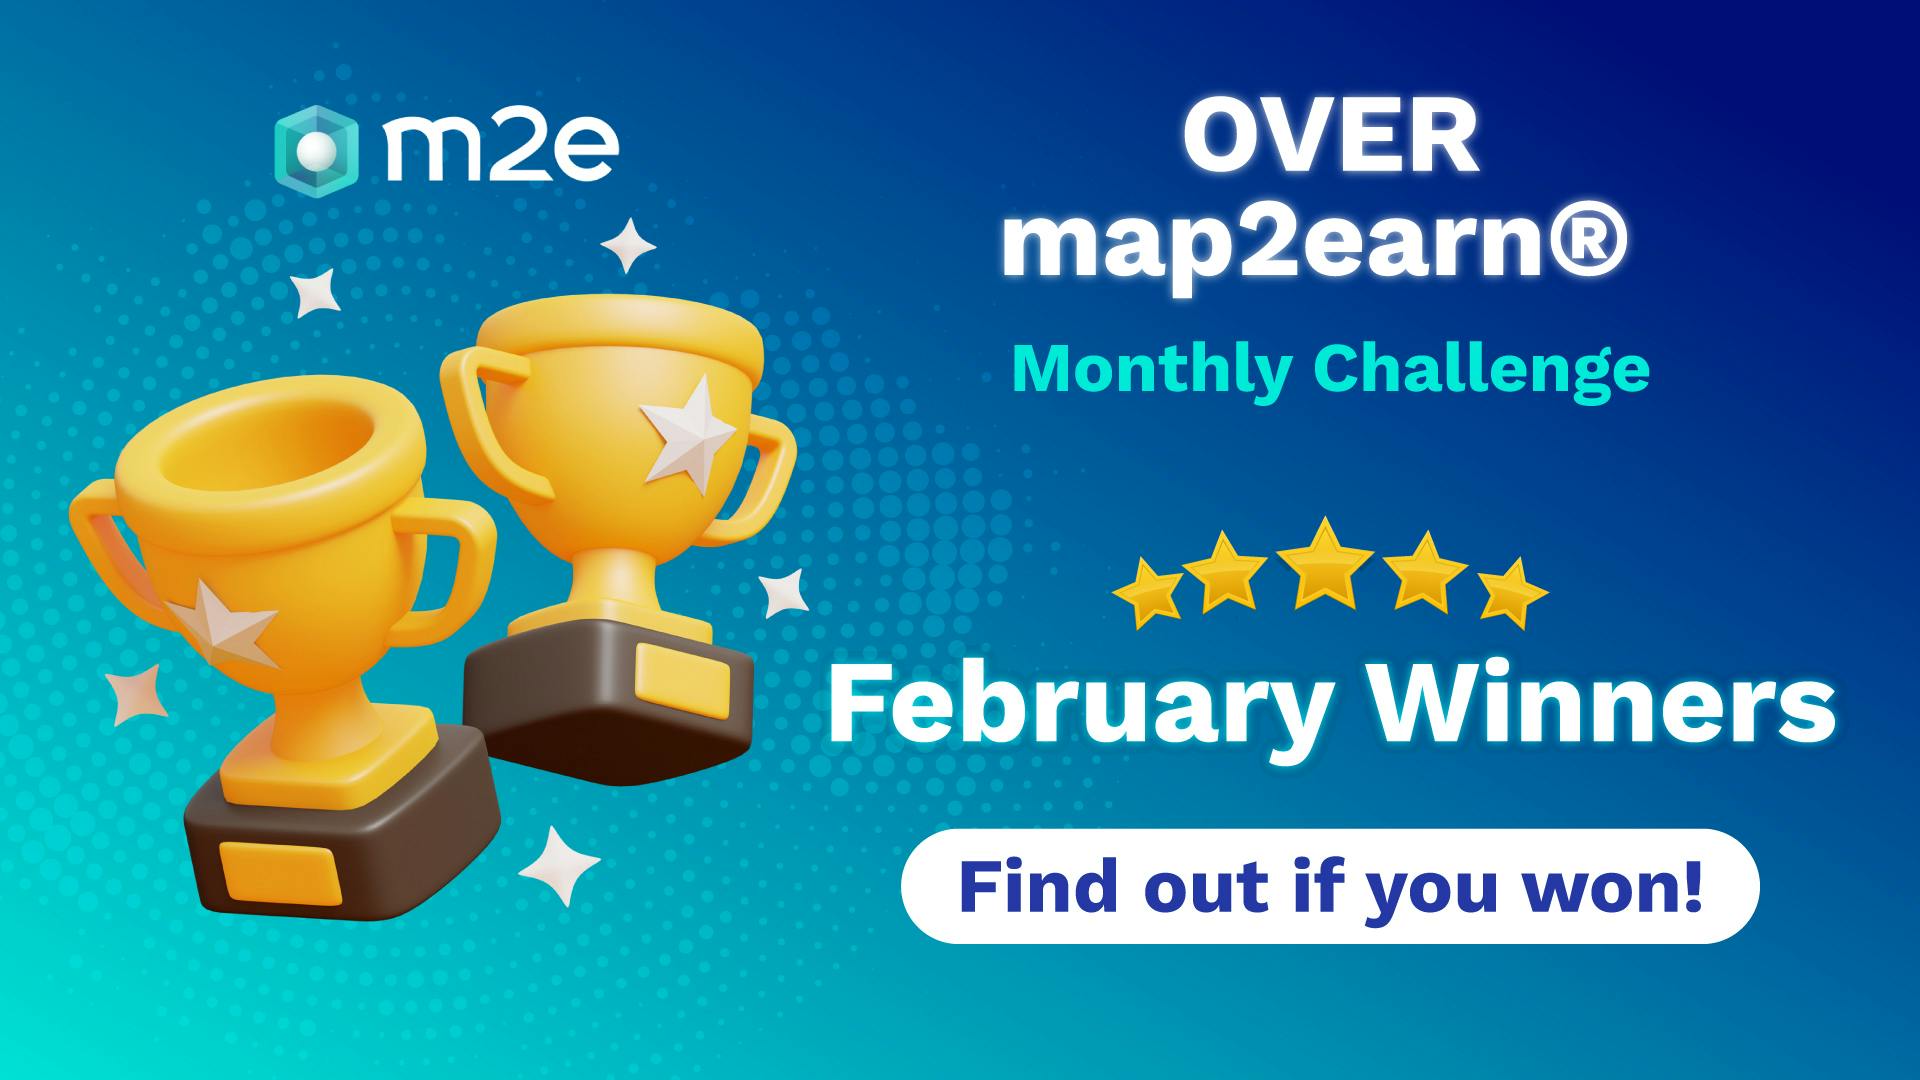 First-ever OVER map2earnⓇ winners announced!